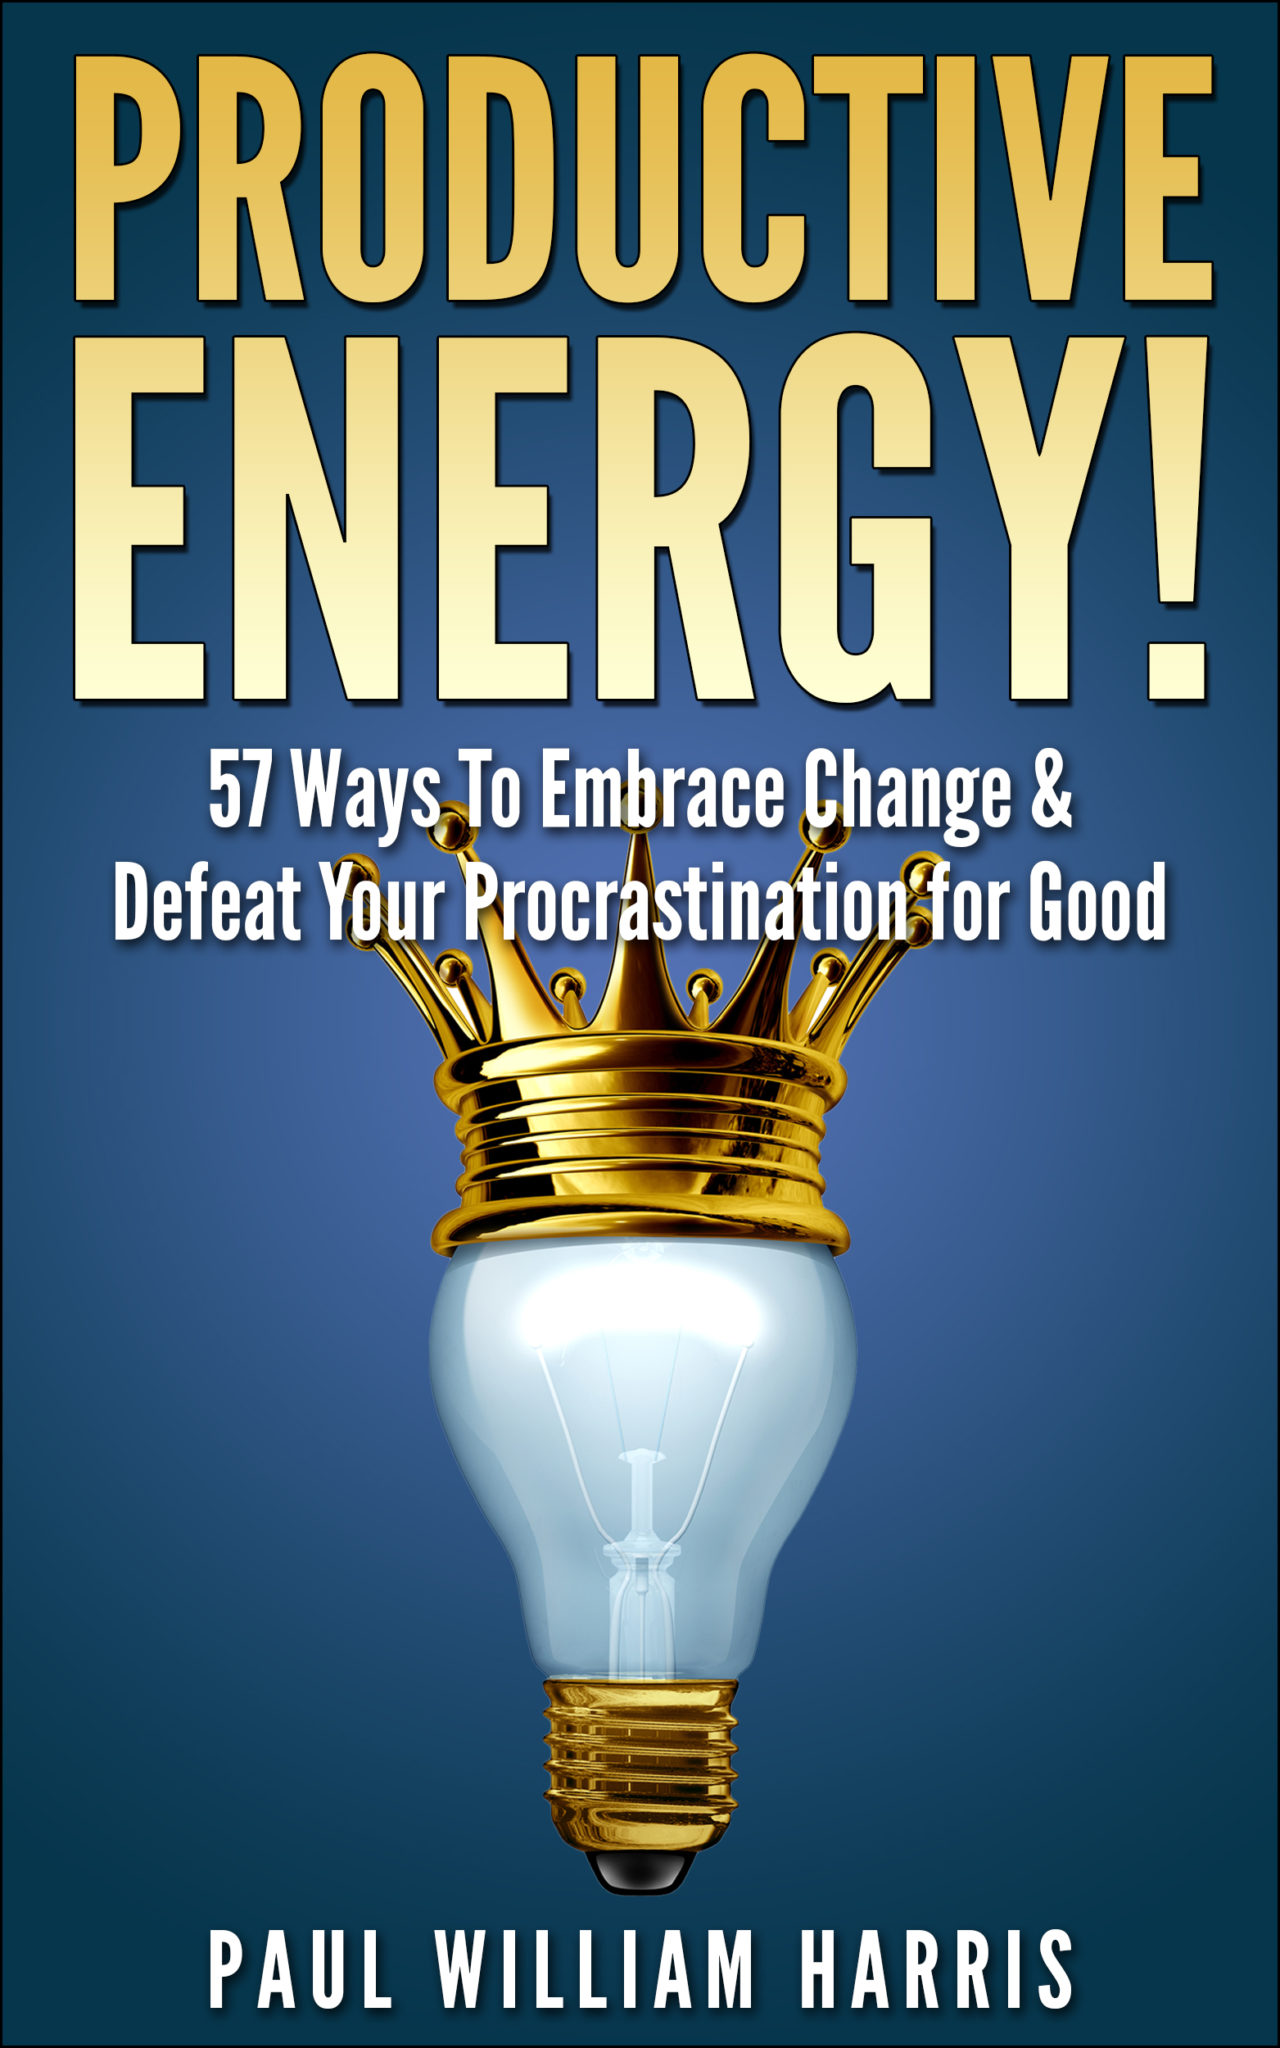 Productive Energy!: 57 Ways To Embrace Change & Defeat Your Procrastination for Good by Paul William Harris